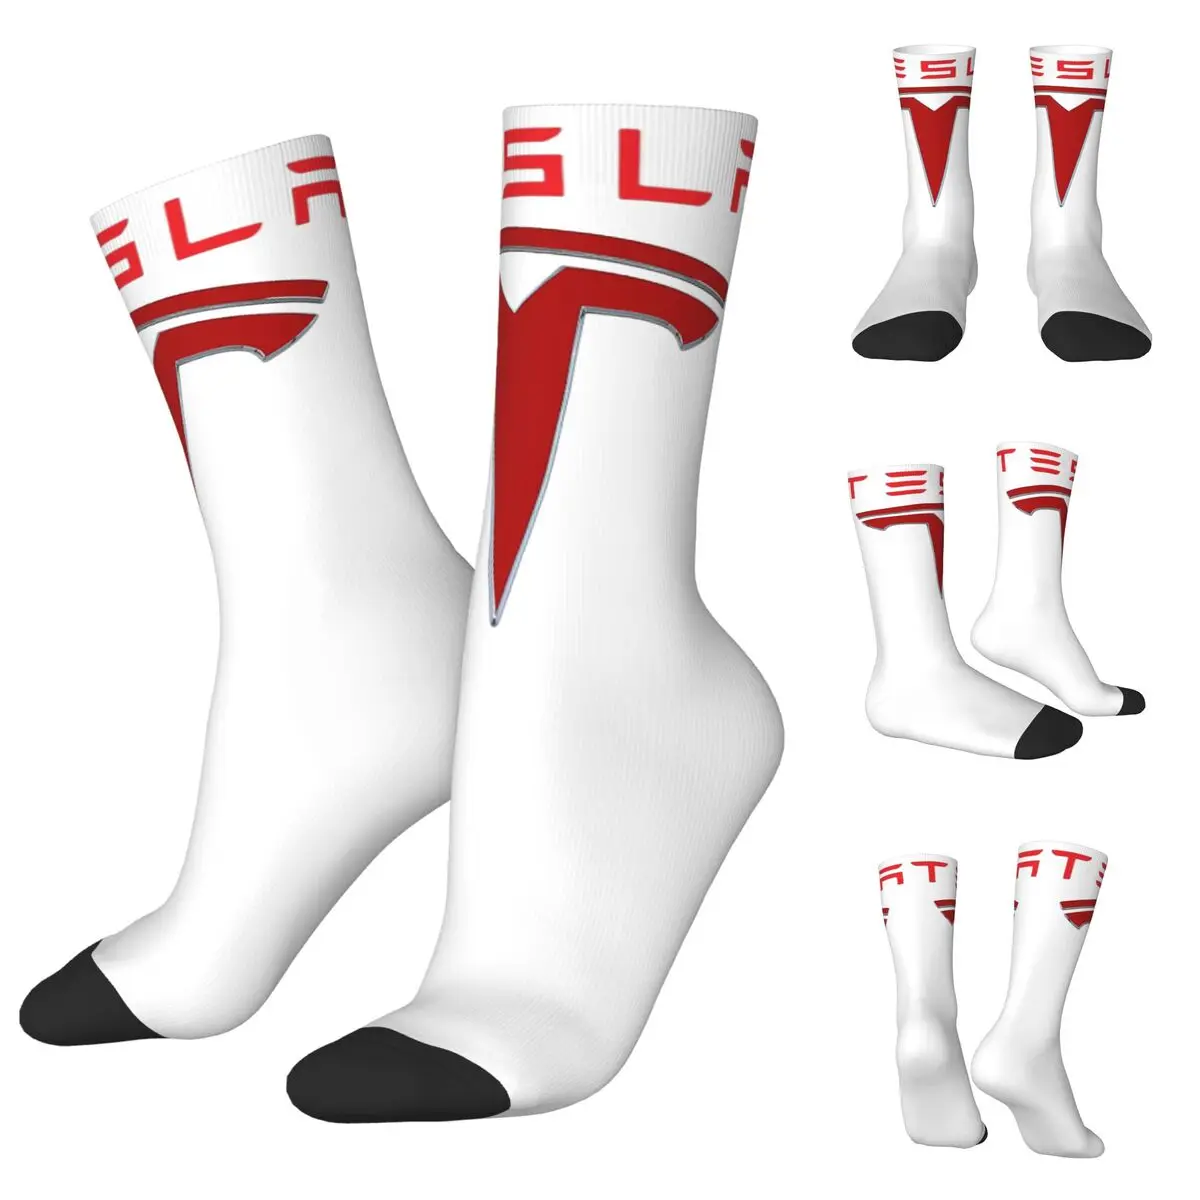 Tesla Red Logo Men and Women printing Socks,lovely Applicable throughout the year Dressing Gift 10pcs lot lovely sulfuric acid paper translucent envelope color printing envelope small fresh envelope school supplies 12 5 17 5